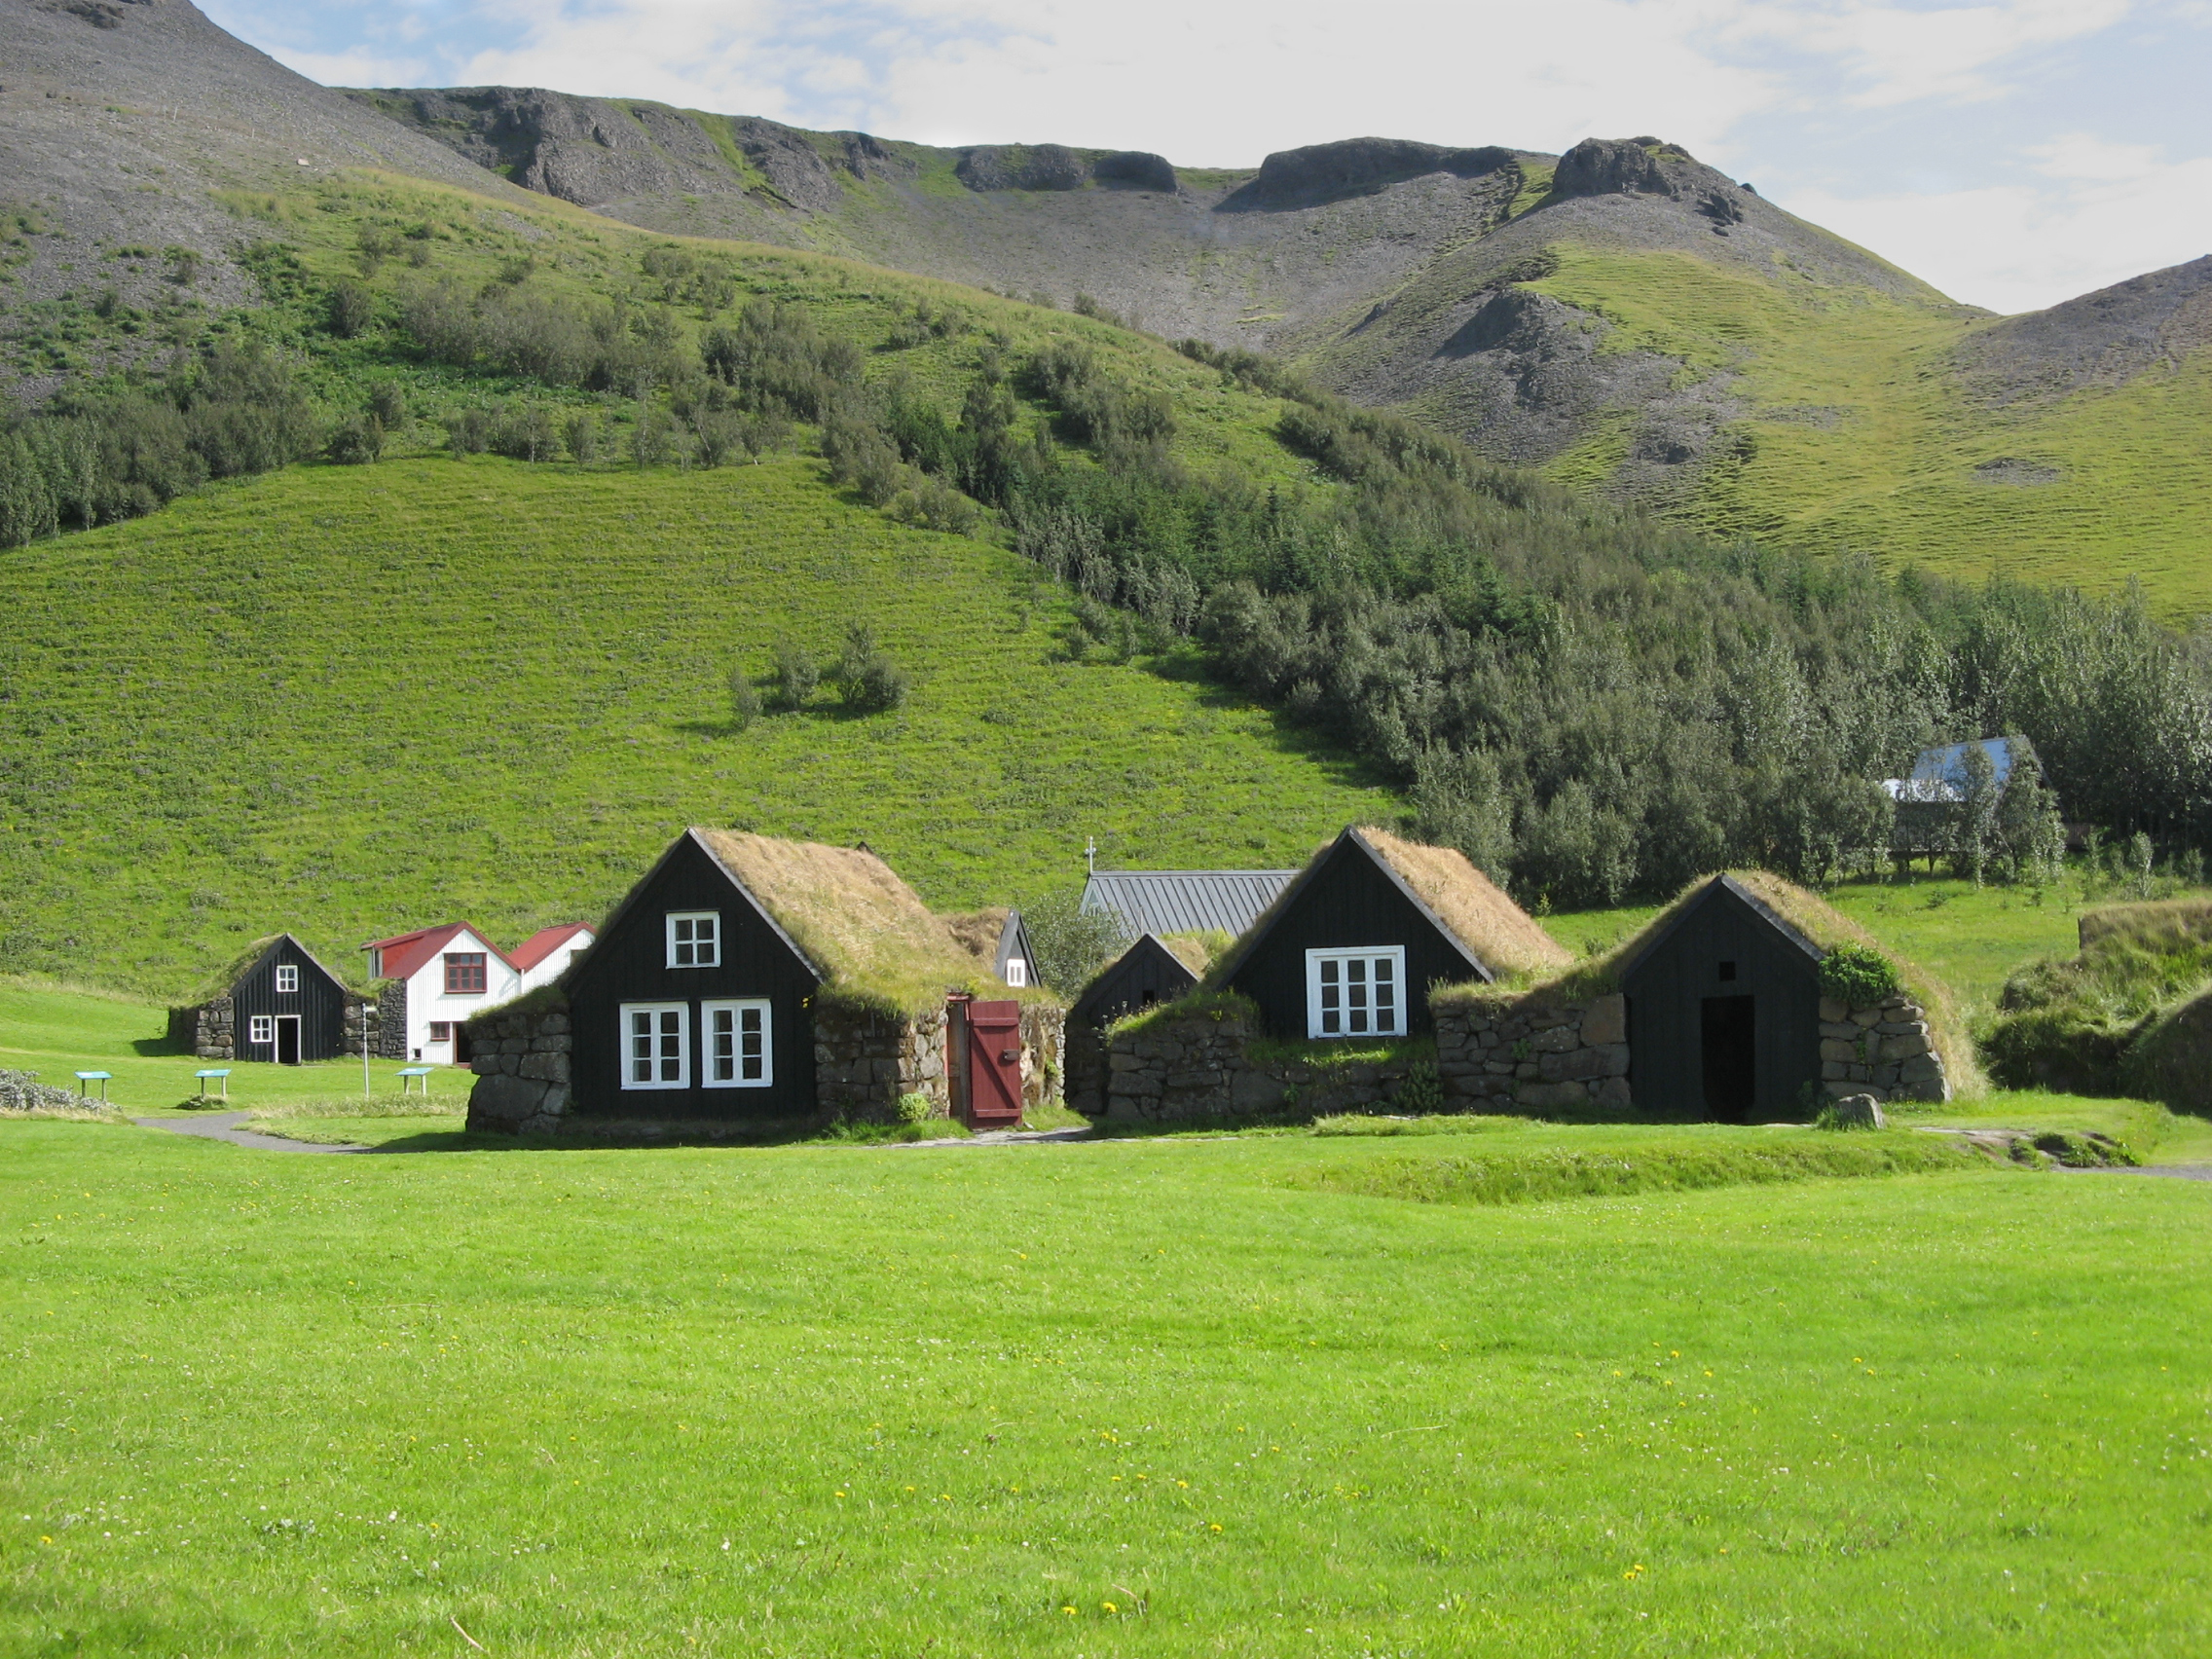 Houses with grass on the roof